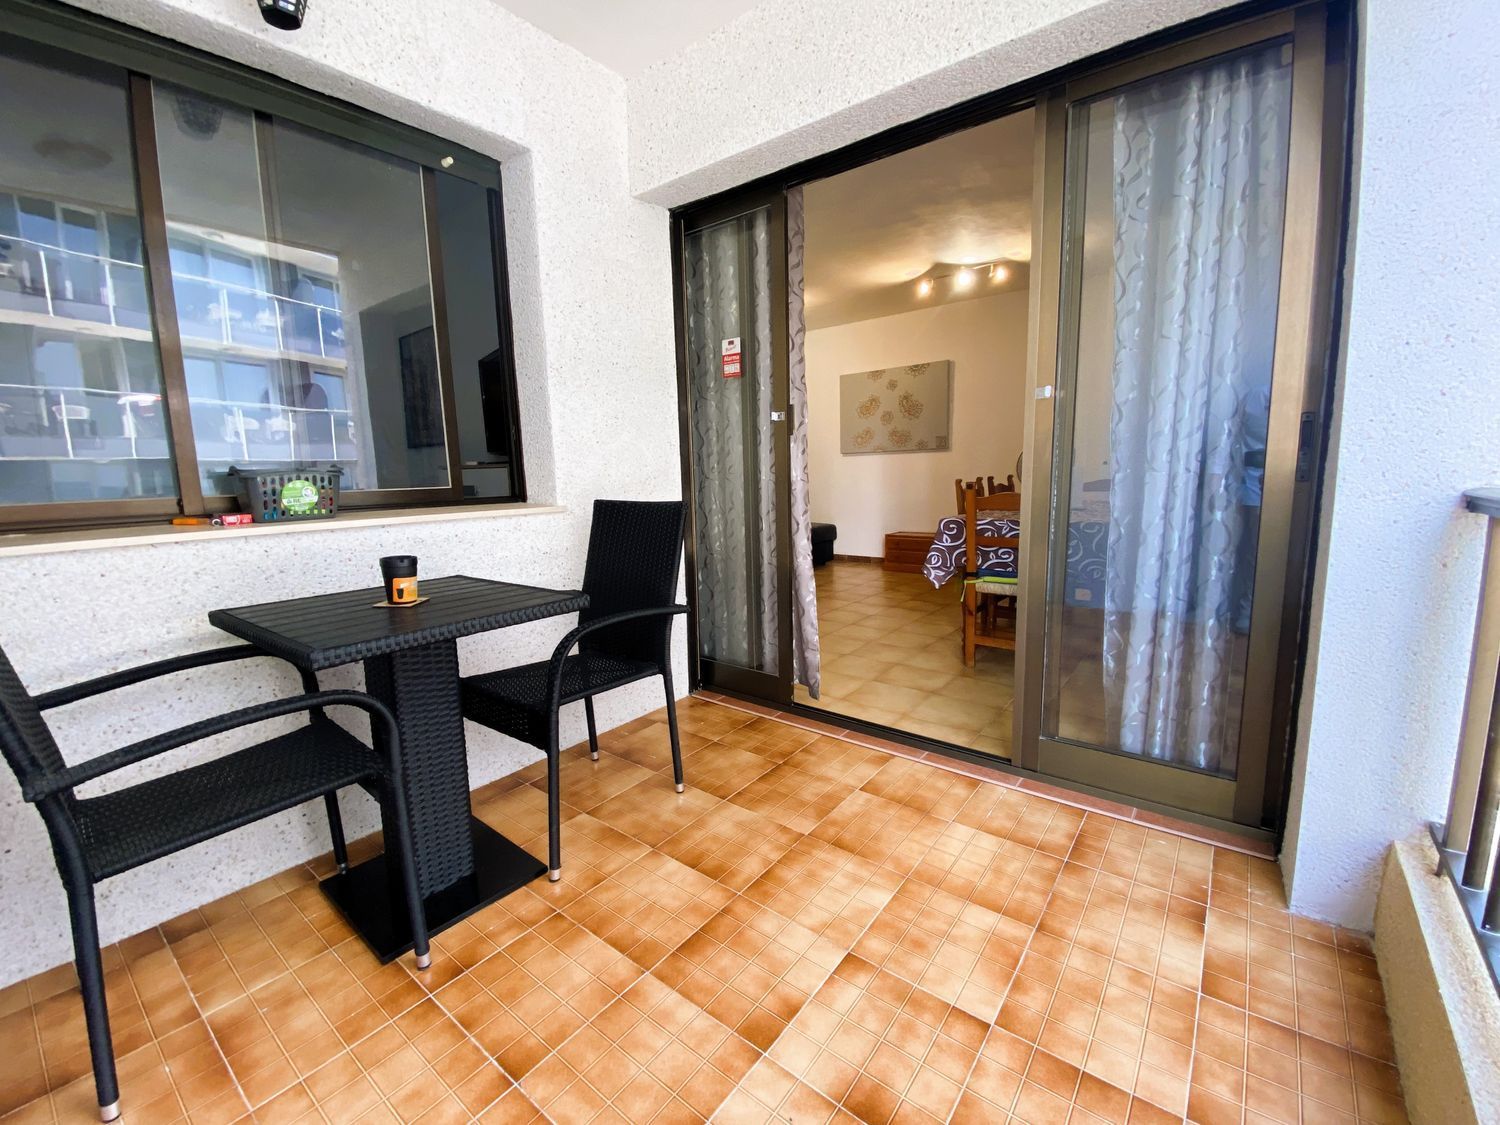 Apartment for sale on the seafront on Calle Balandros, in Calpe